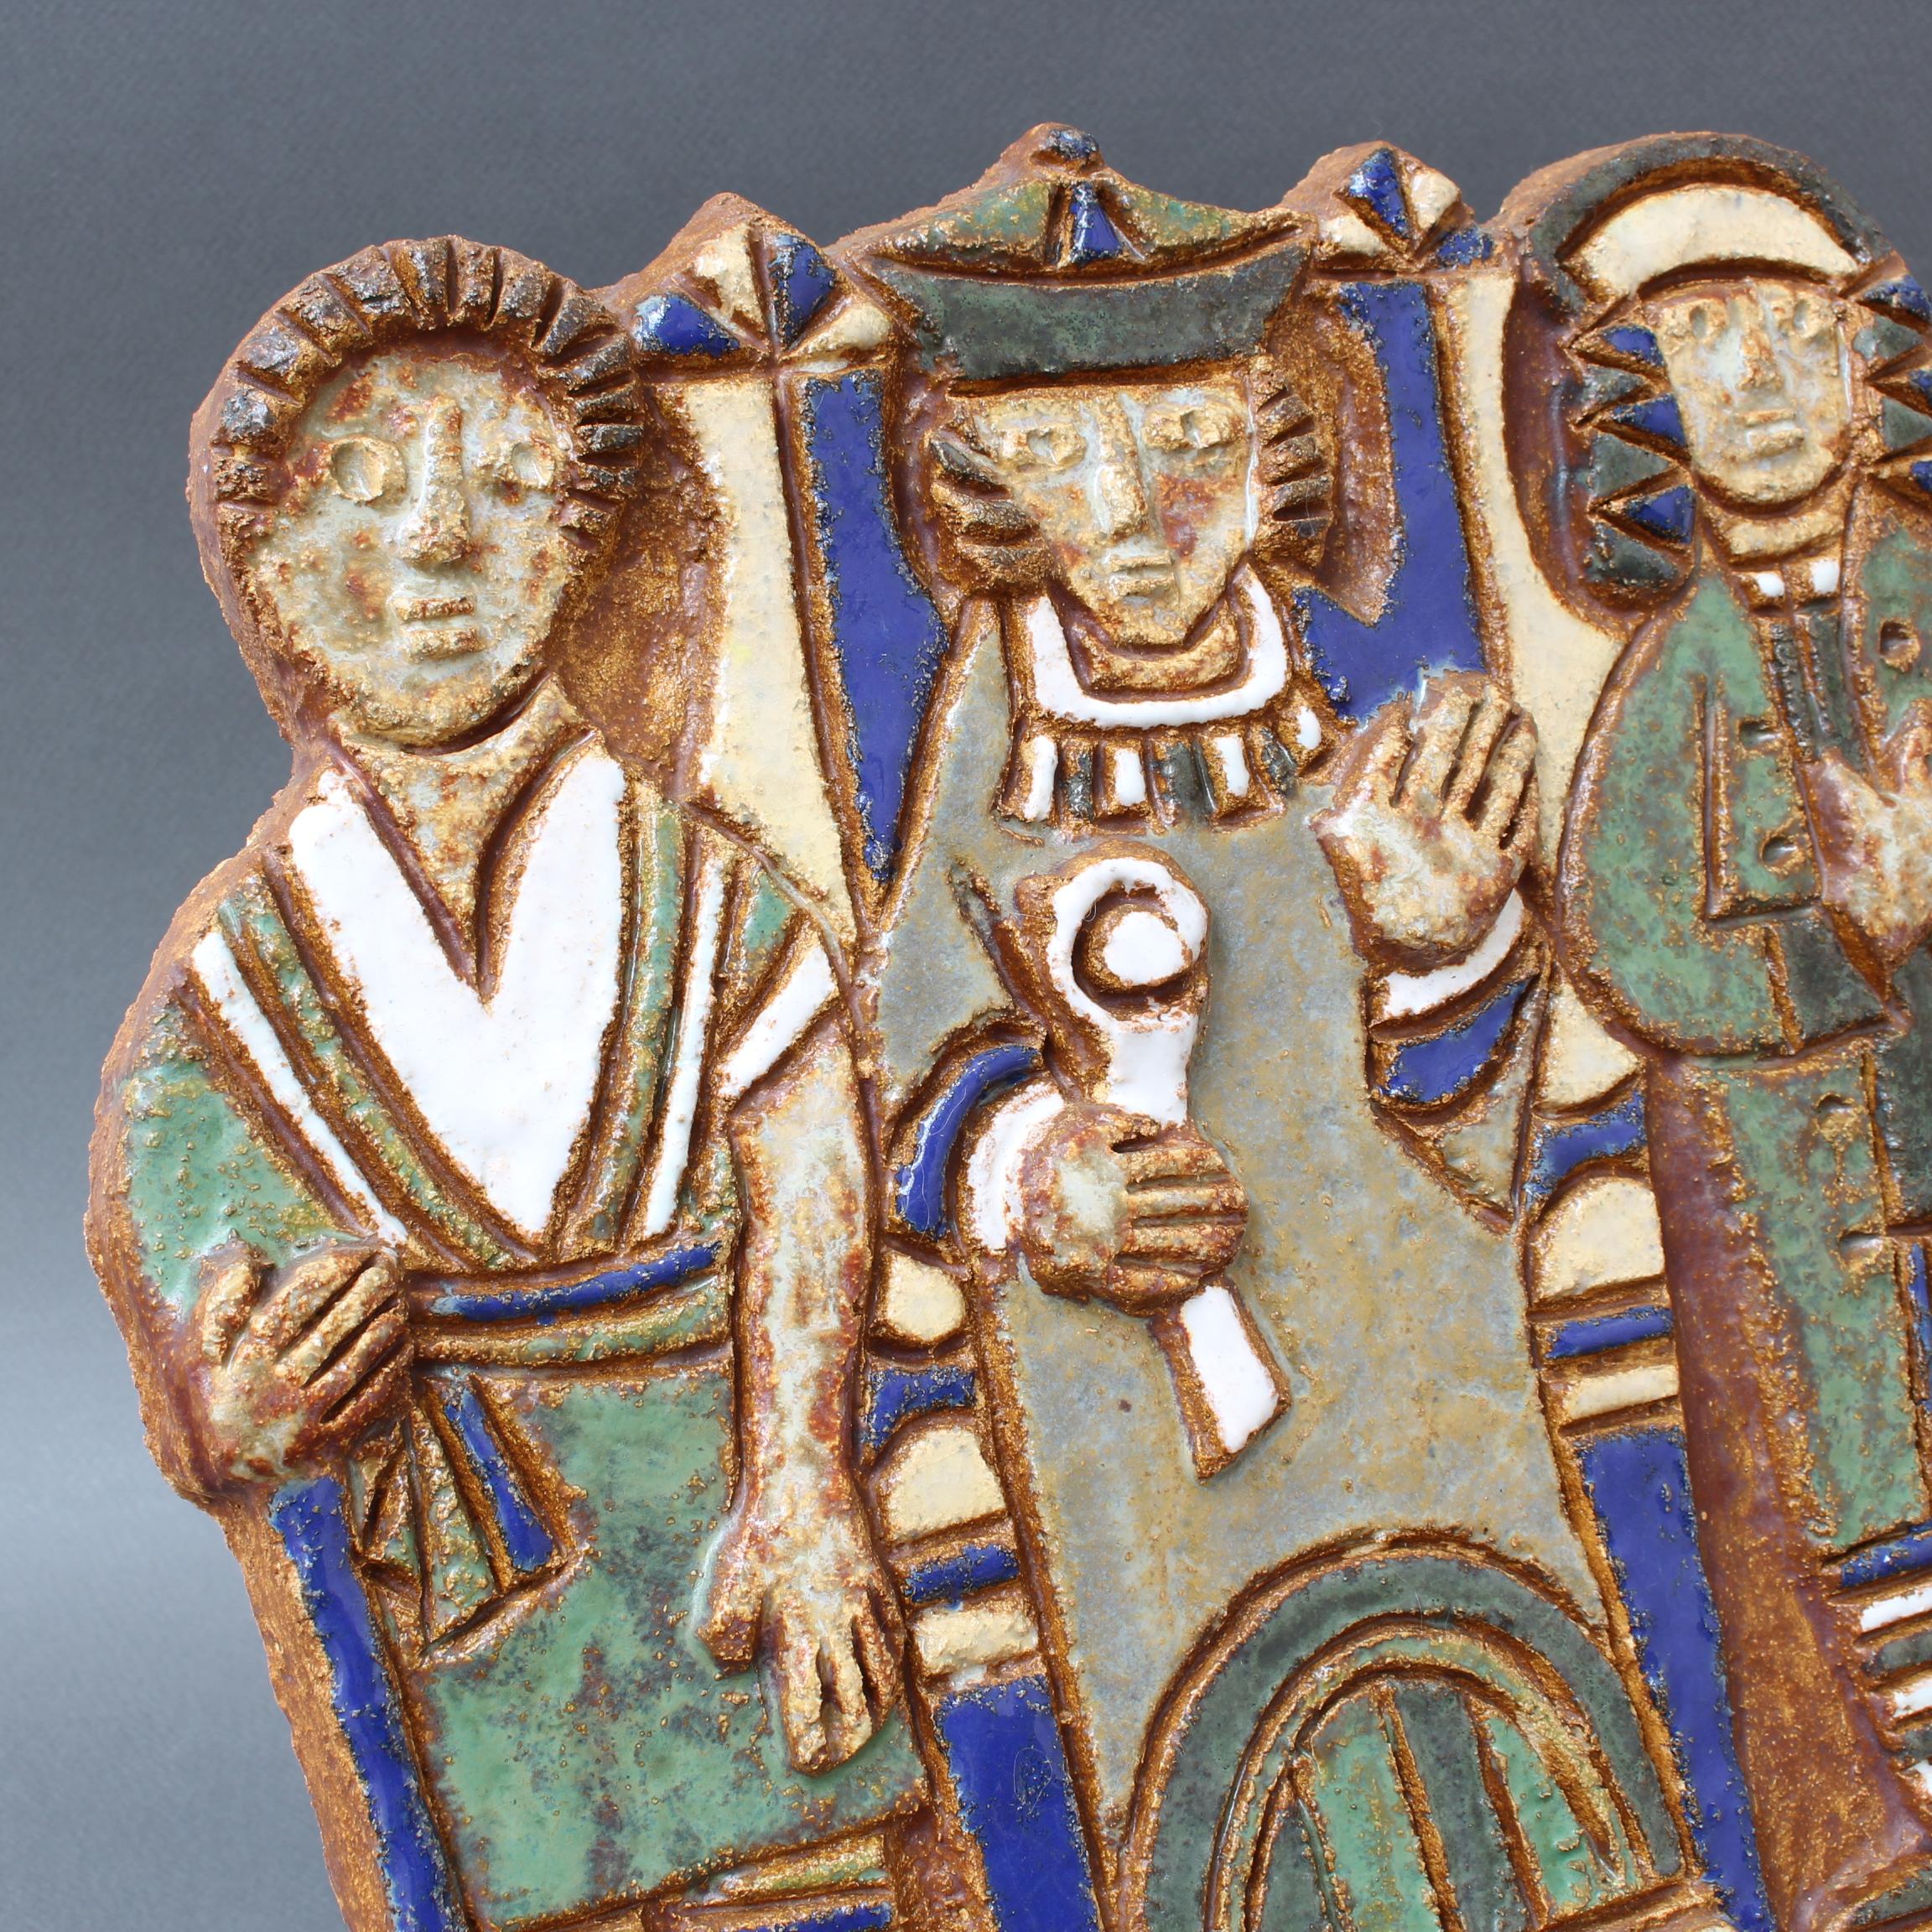 French Decorative Ceramic Wall Plaque with Three Figures by Les Argonautes 1960s For Sale 3